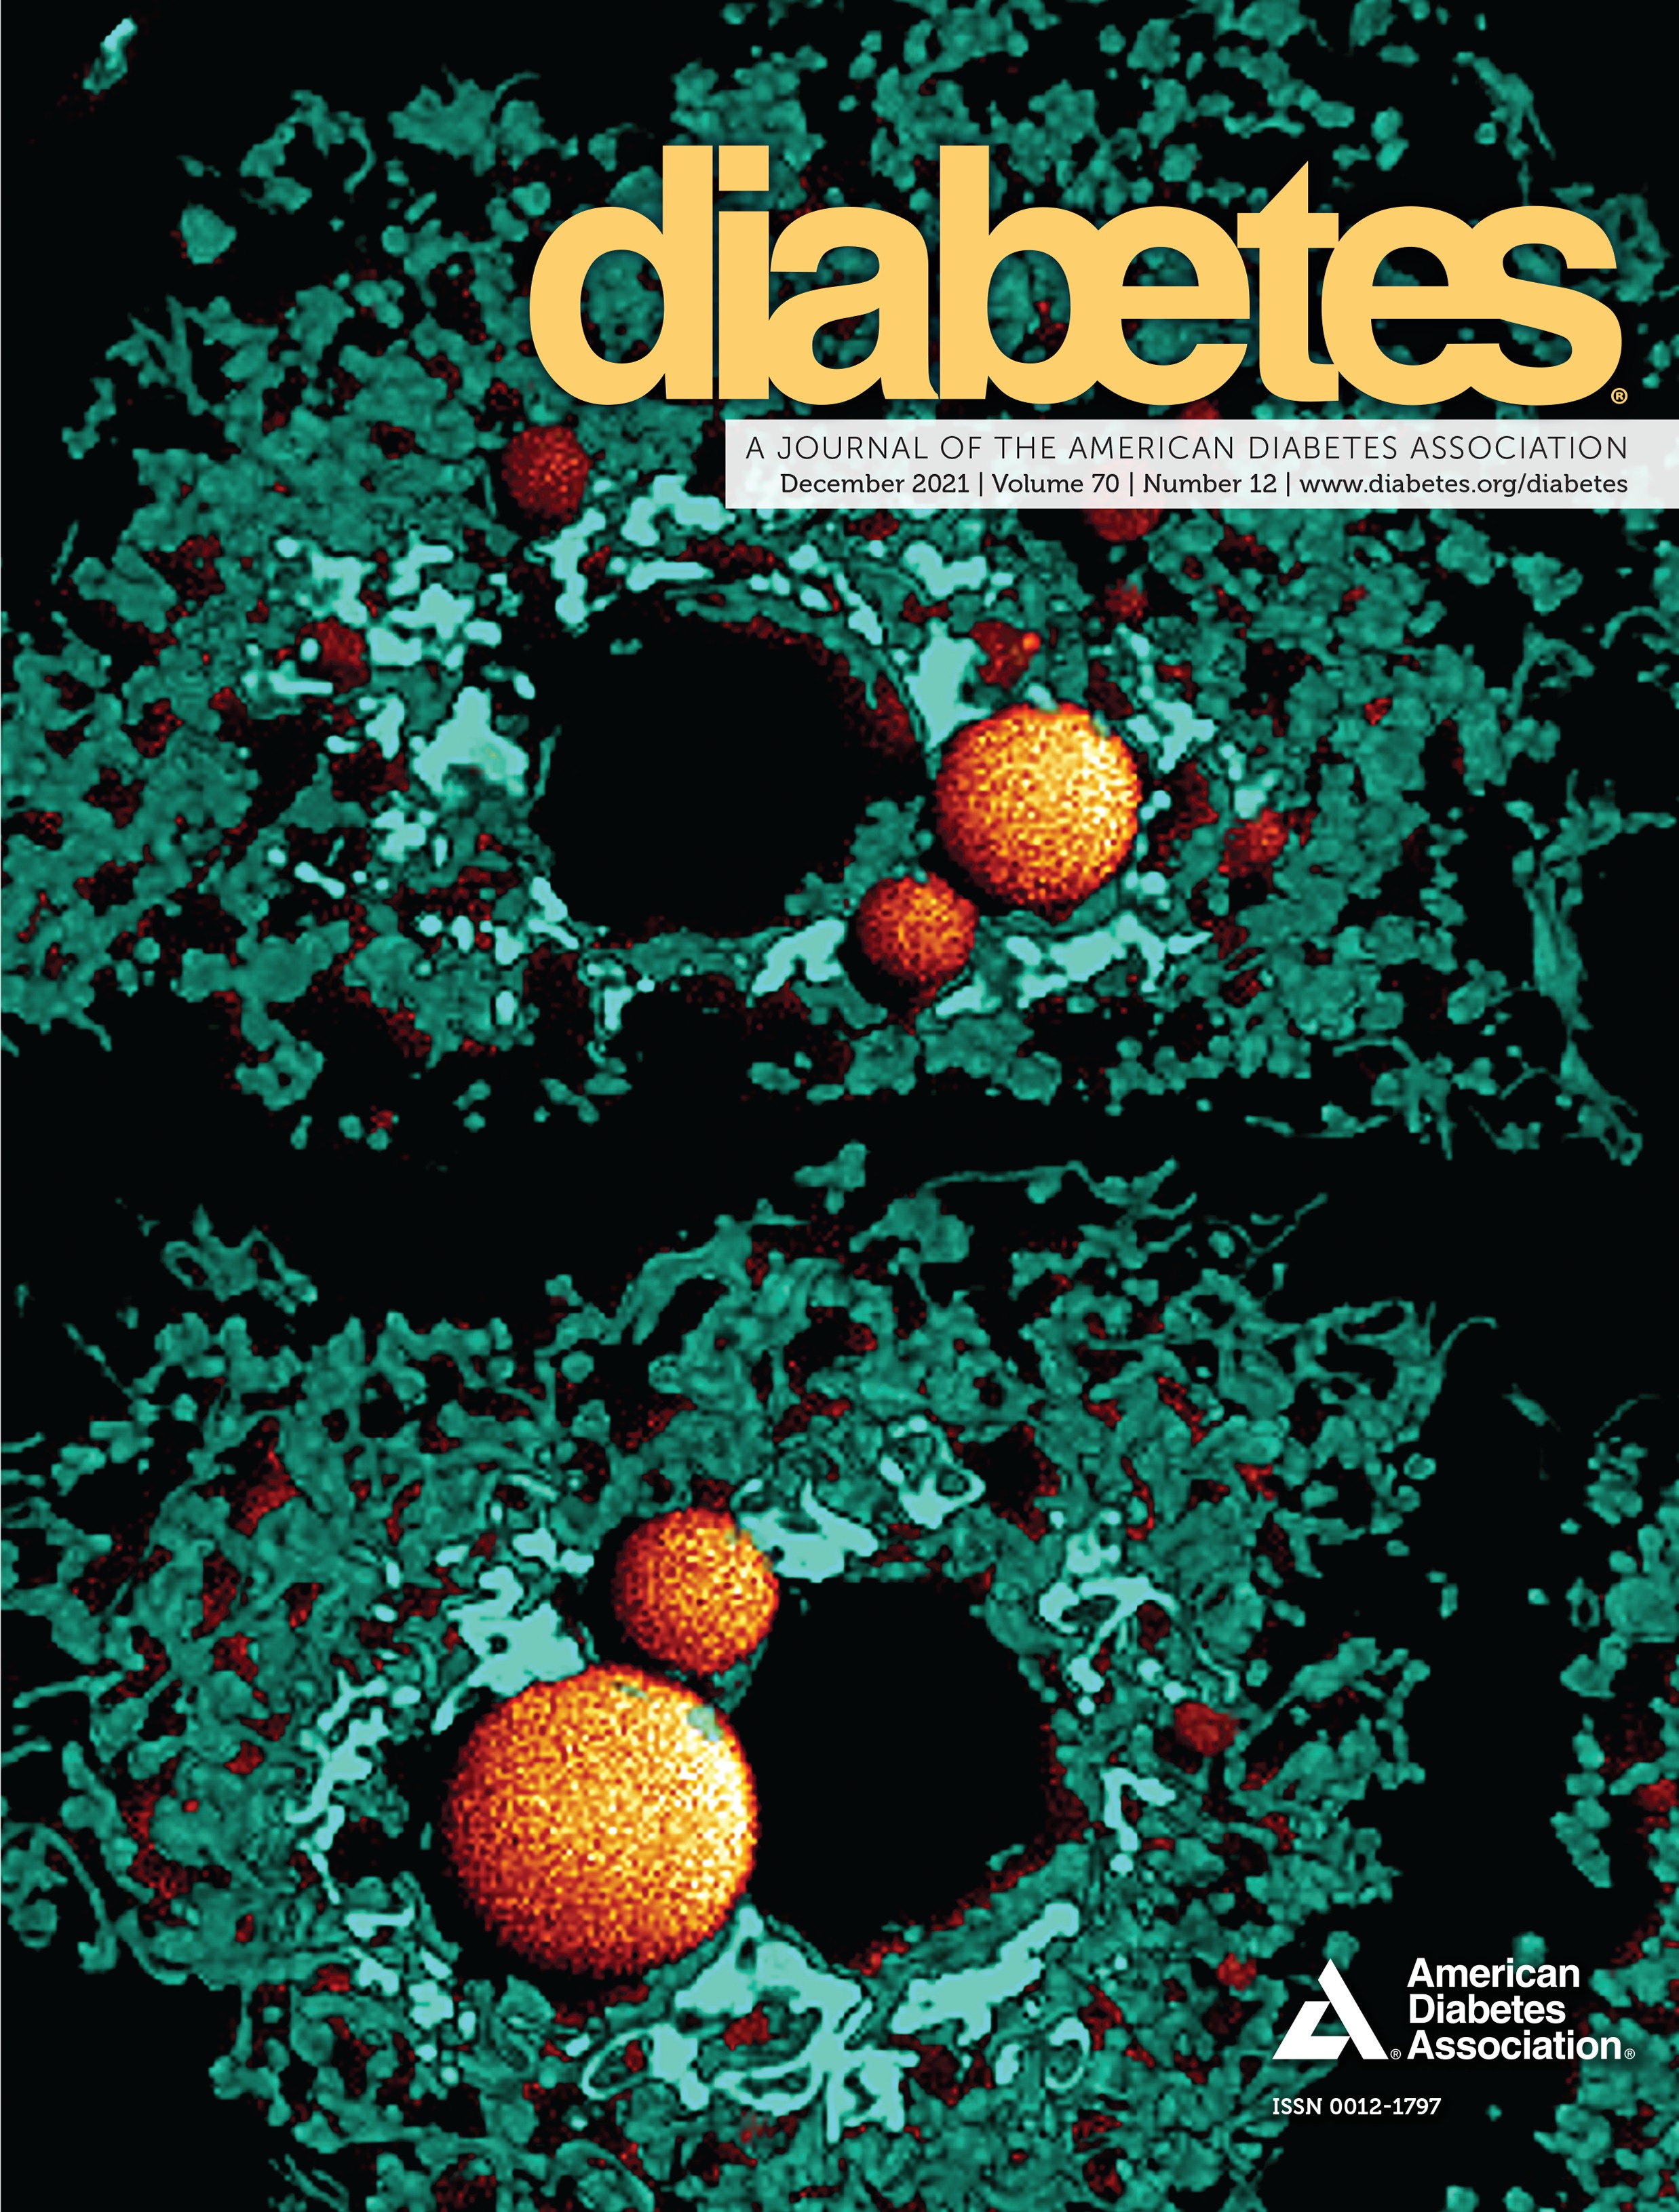 Possible Involvement of Adipose Tissue in Patients With Older Age, Obesity, and Diabetes With SARS-CoV-2 Infection (COVID-19) via GRP78 (BIP/HSPA5): Significance of Hyperinsulinemia Management in COVID-19